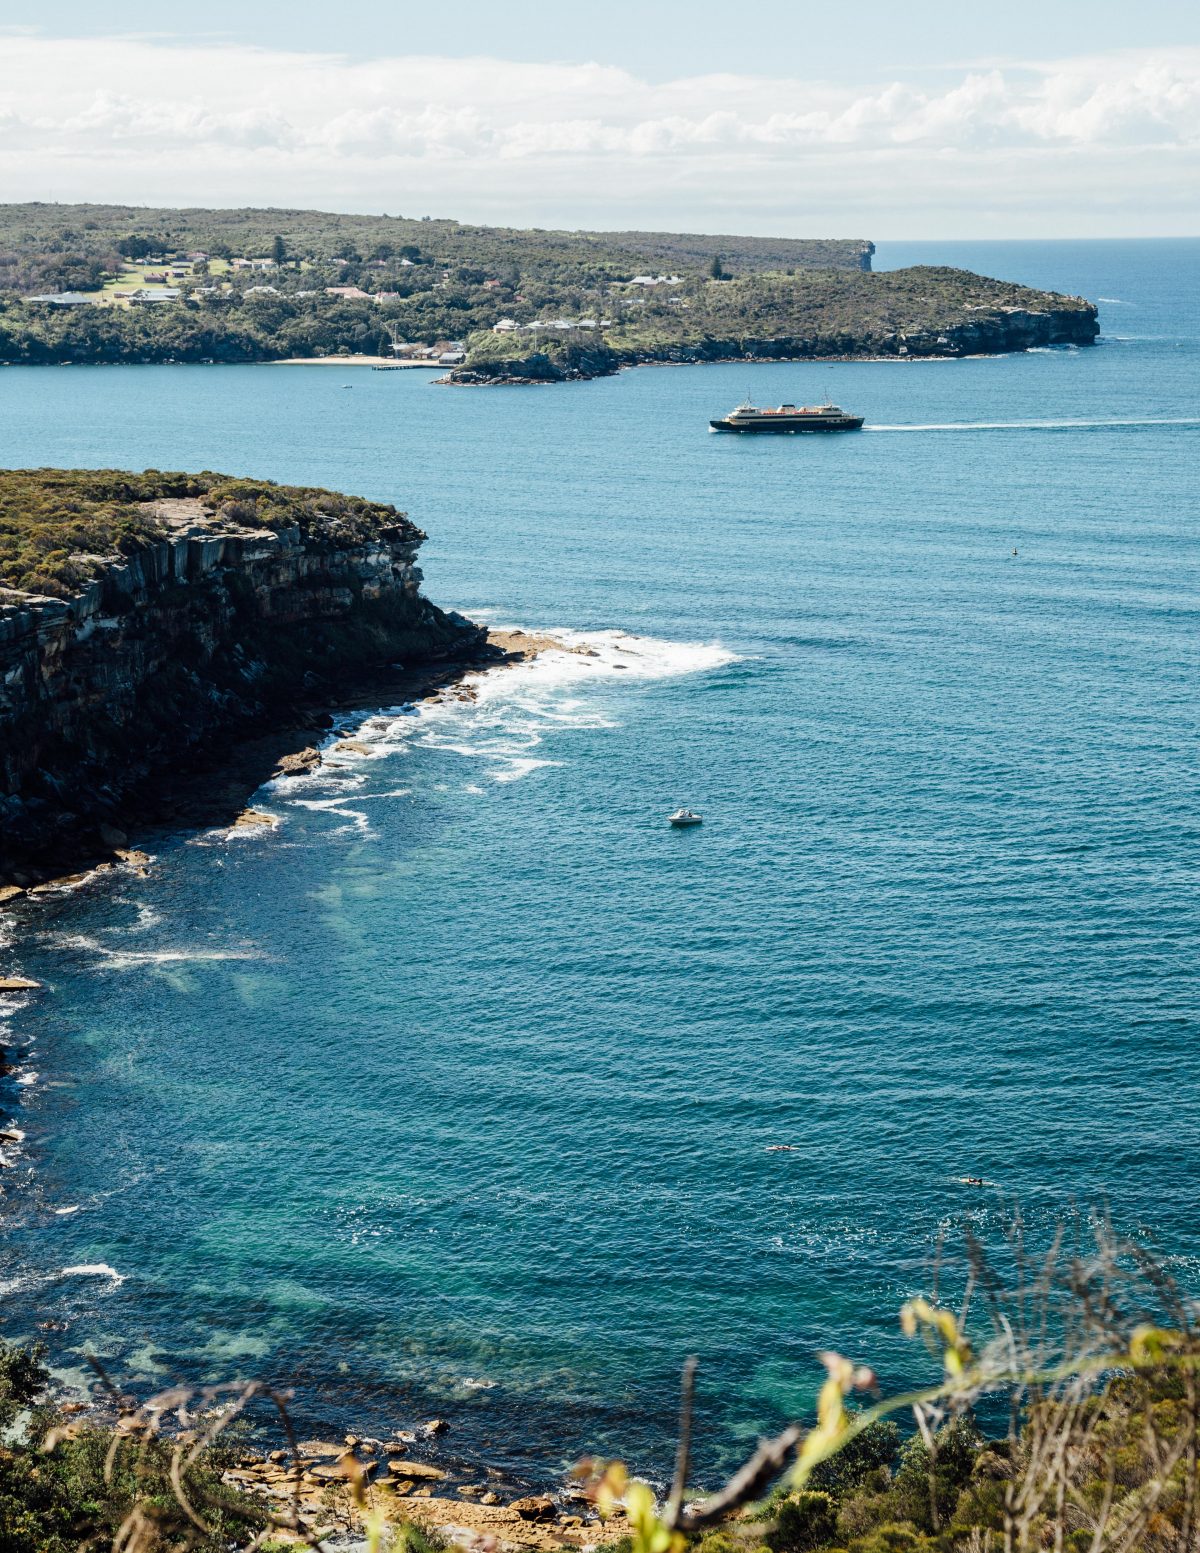 Looking towards North Head from South Head, Sydney Harbour National Park. Photo: Jack Bussell